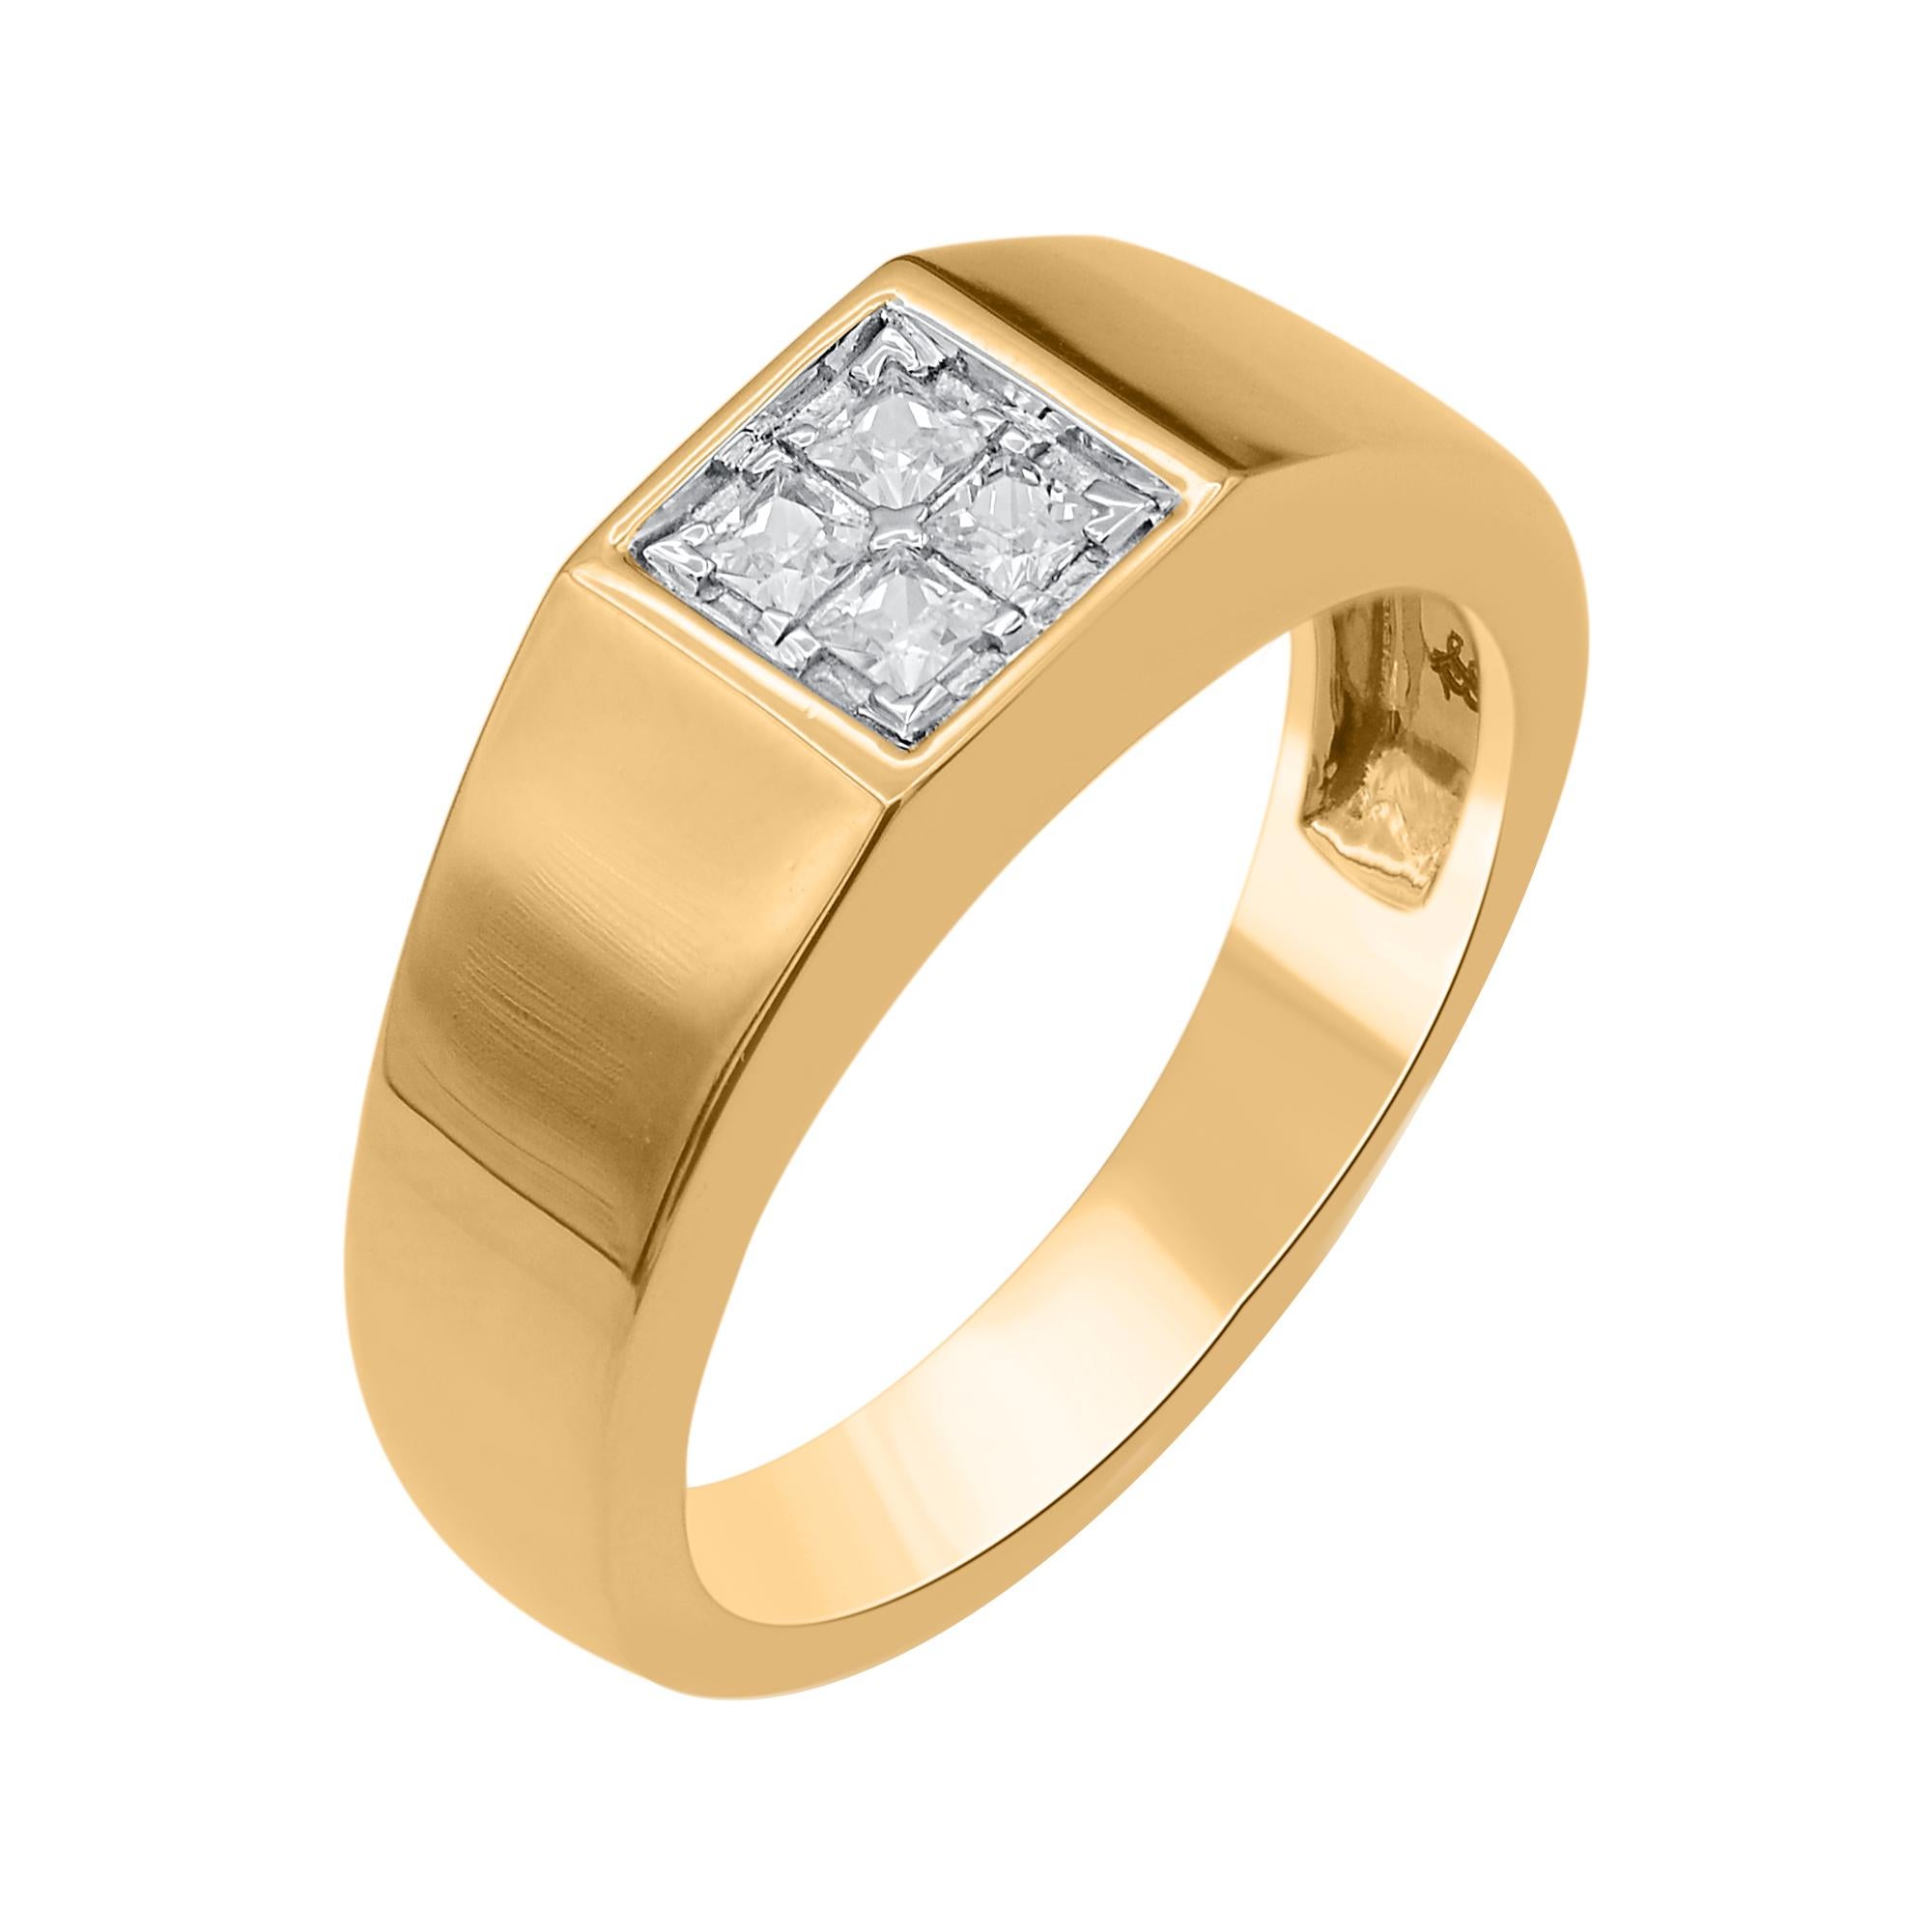 Elevate your sophisticated style when you wear this men's diamond band ring in 14KT yellow gold. These band ring are studded with 4 princess Cut natural diamonds in 0.30 carat. The white diamonds are graded as H-I color and I-2 clarity.